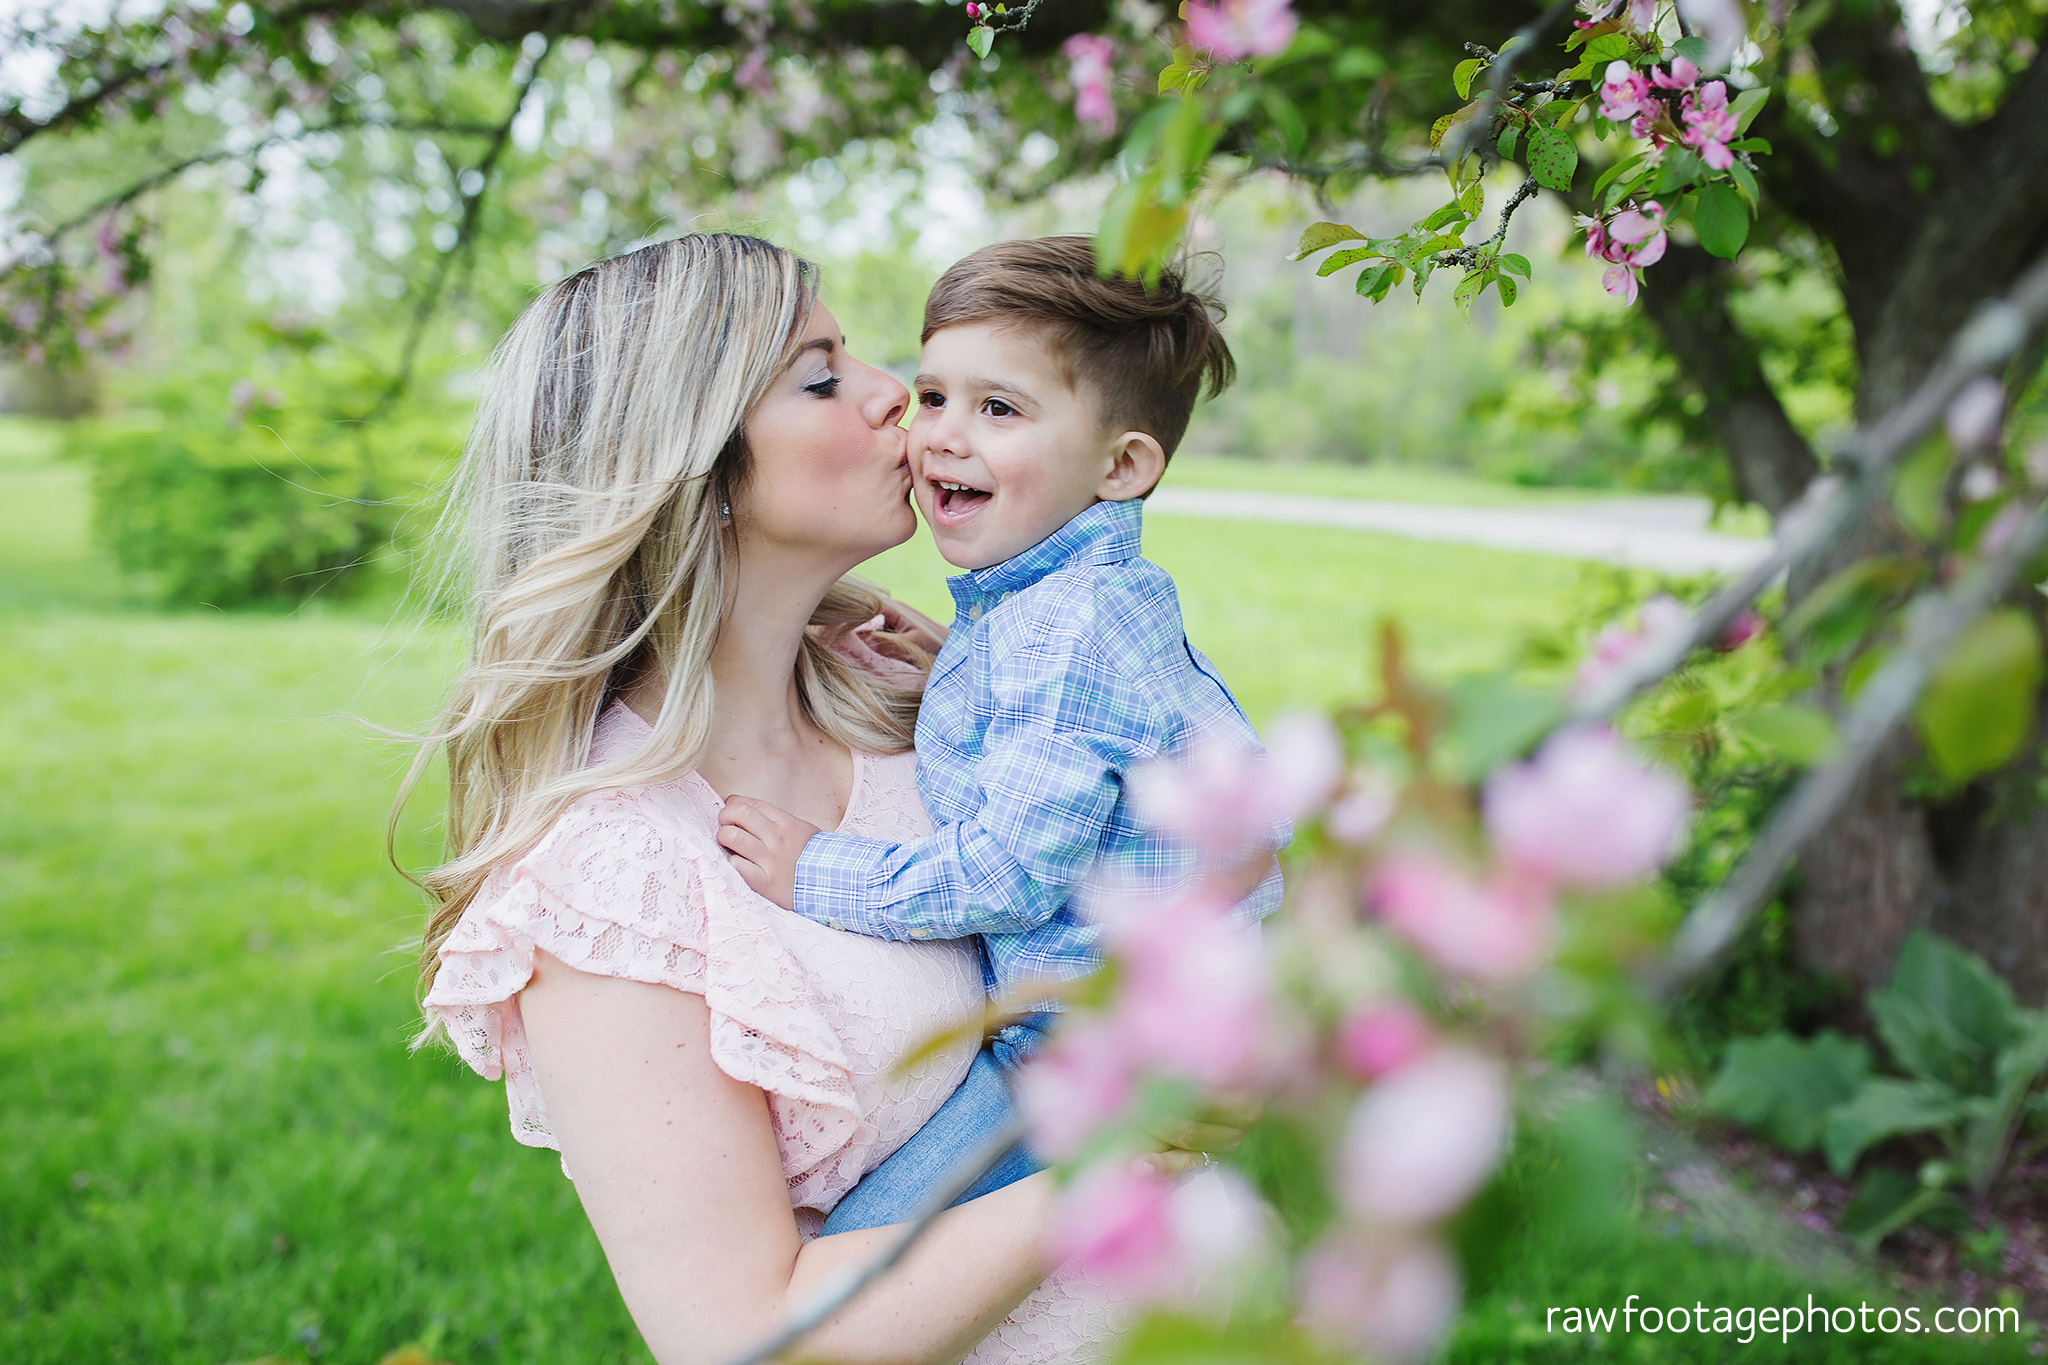 london_ontario_family_photography-lifestyle_photography-maternity_photos-raw_footage_photography-best_of_2018096.jpg